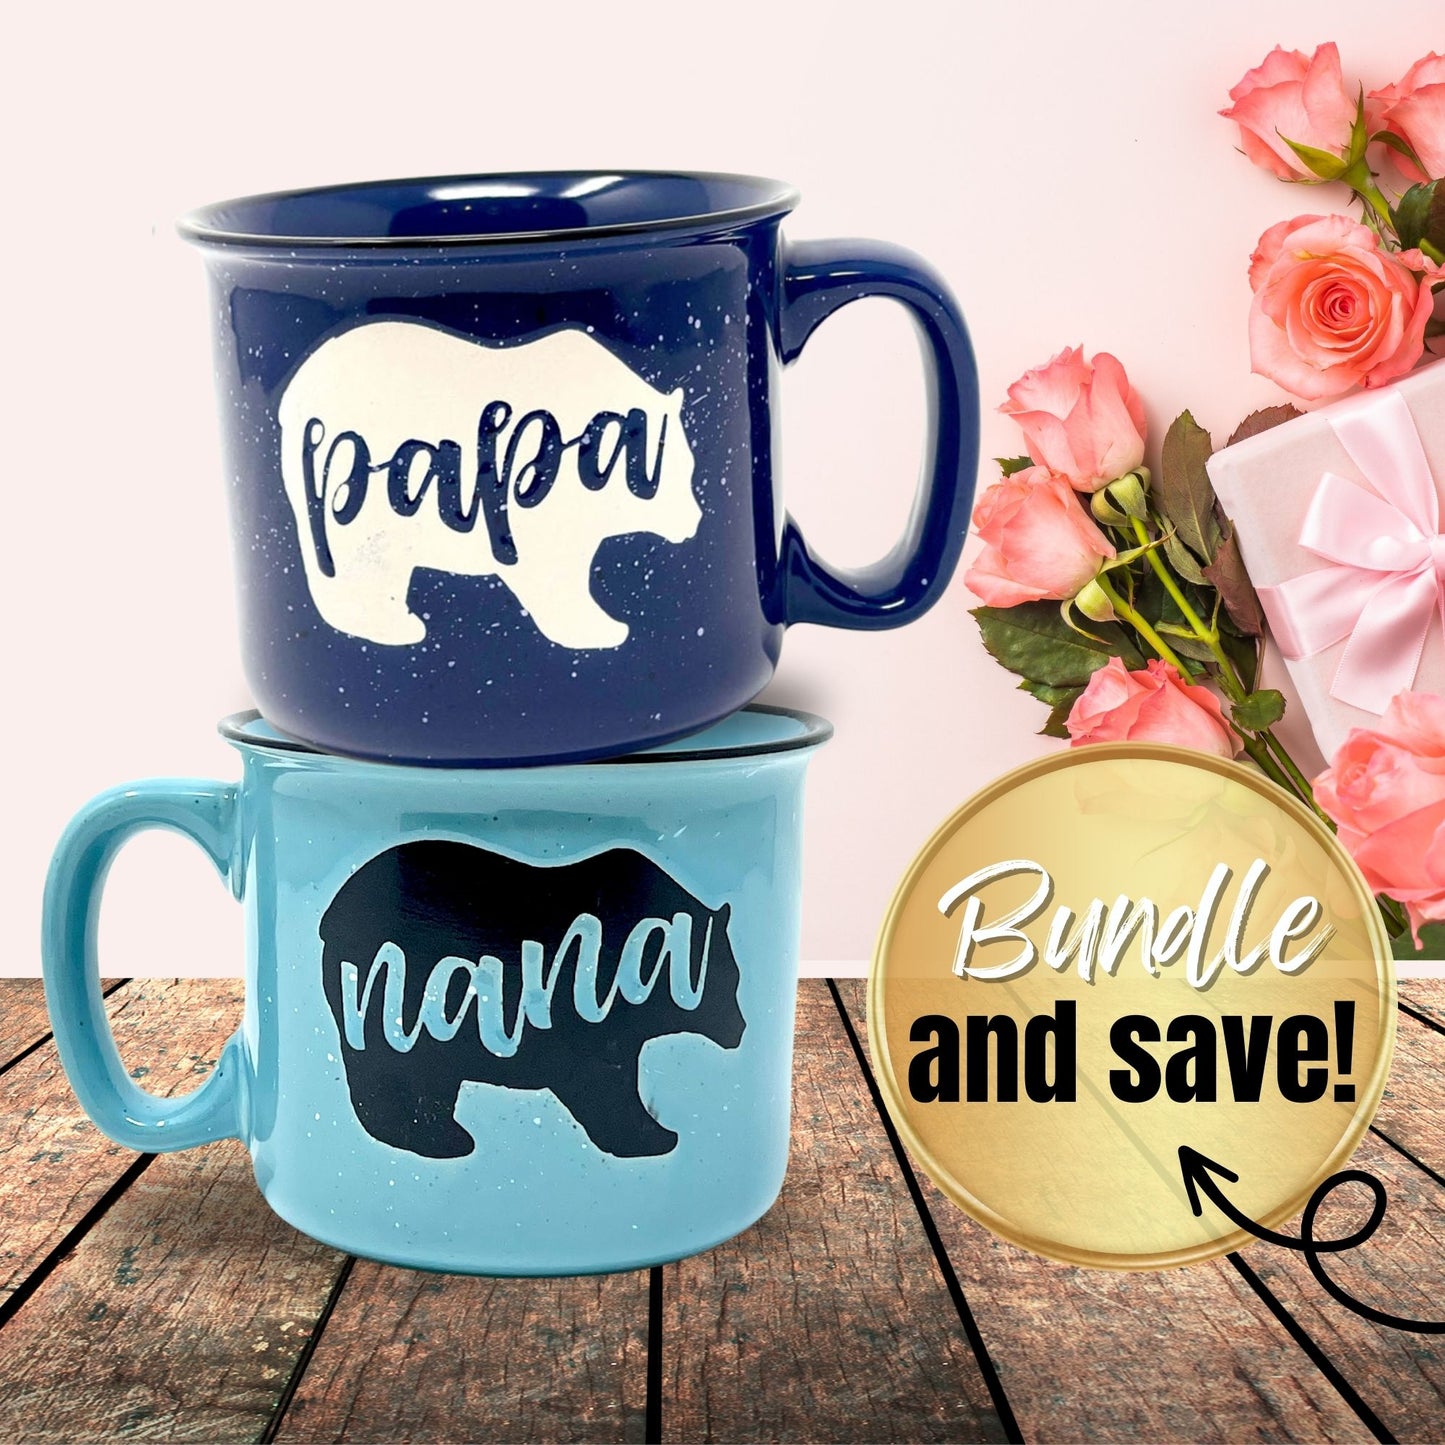 Nana Bear Teal & Papa Bear Navy Blue Coffee Mug Gift Set - Cute, Large Coffee Cup Sets for Parents, Couples, Grandparents - Unique Fun Gifts for Him, Her, Birthday, Anniversary, Mother's Day, Father's Day, Christmas